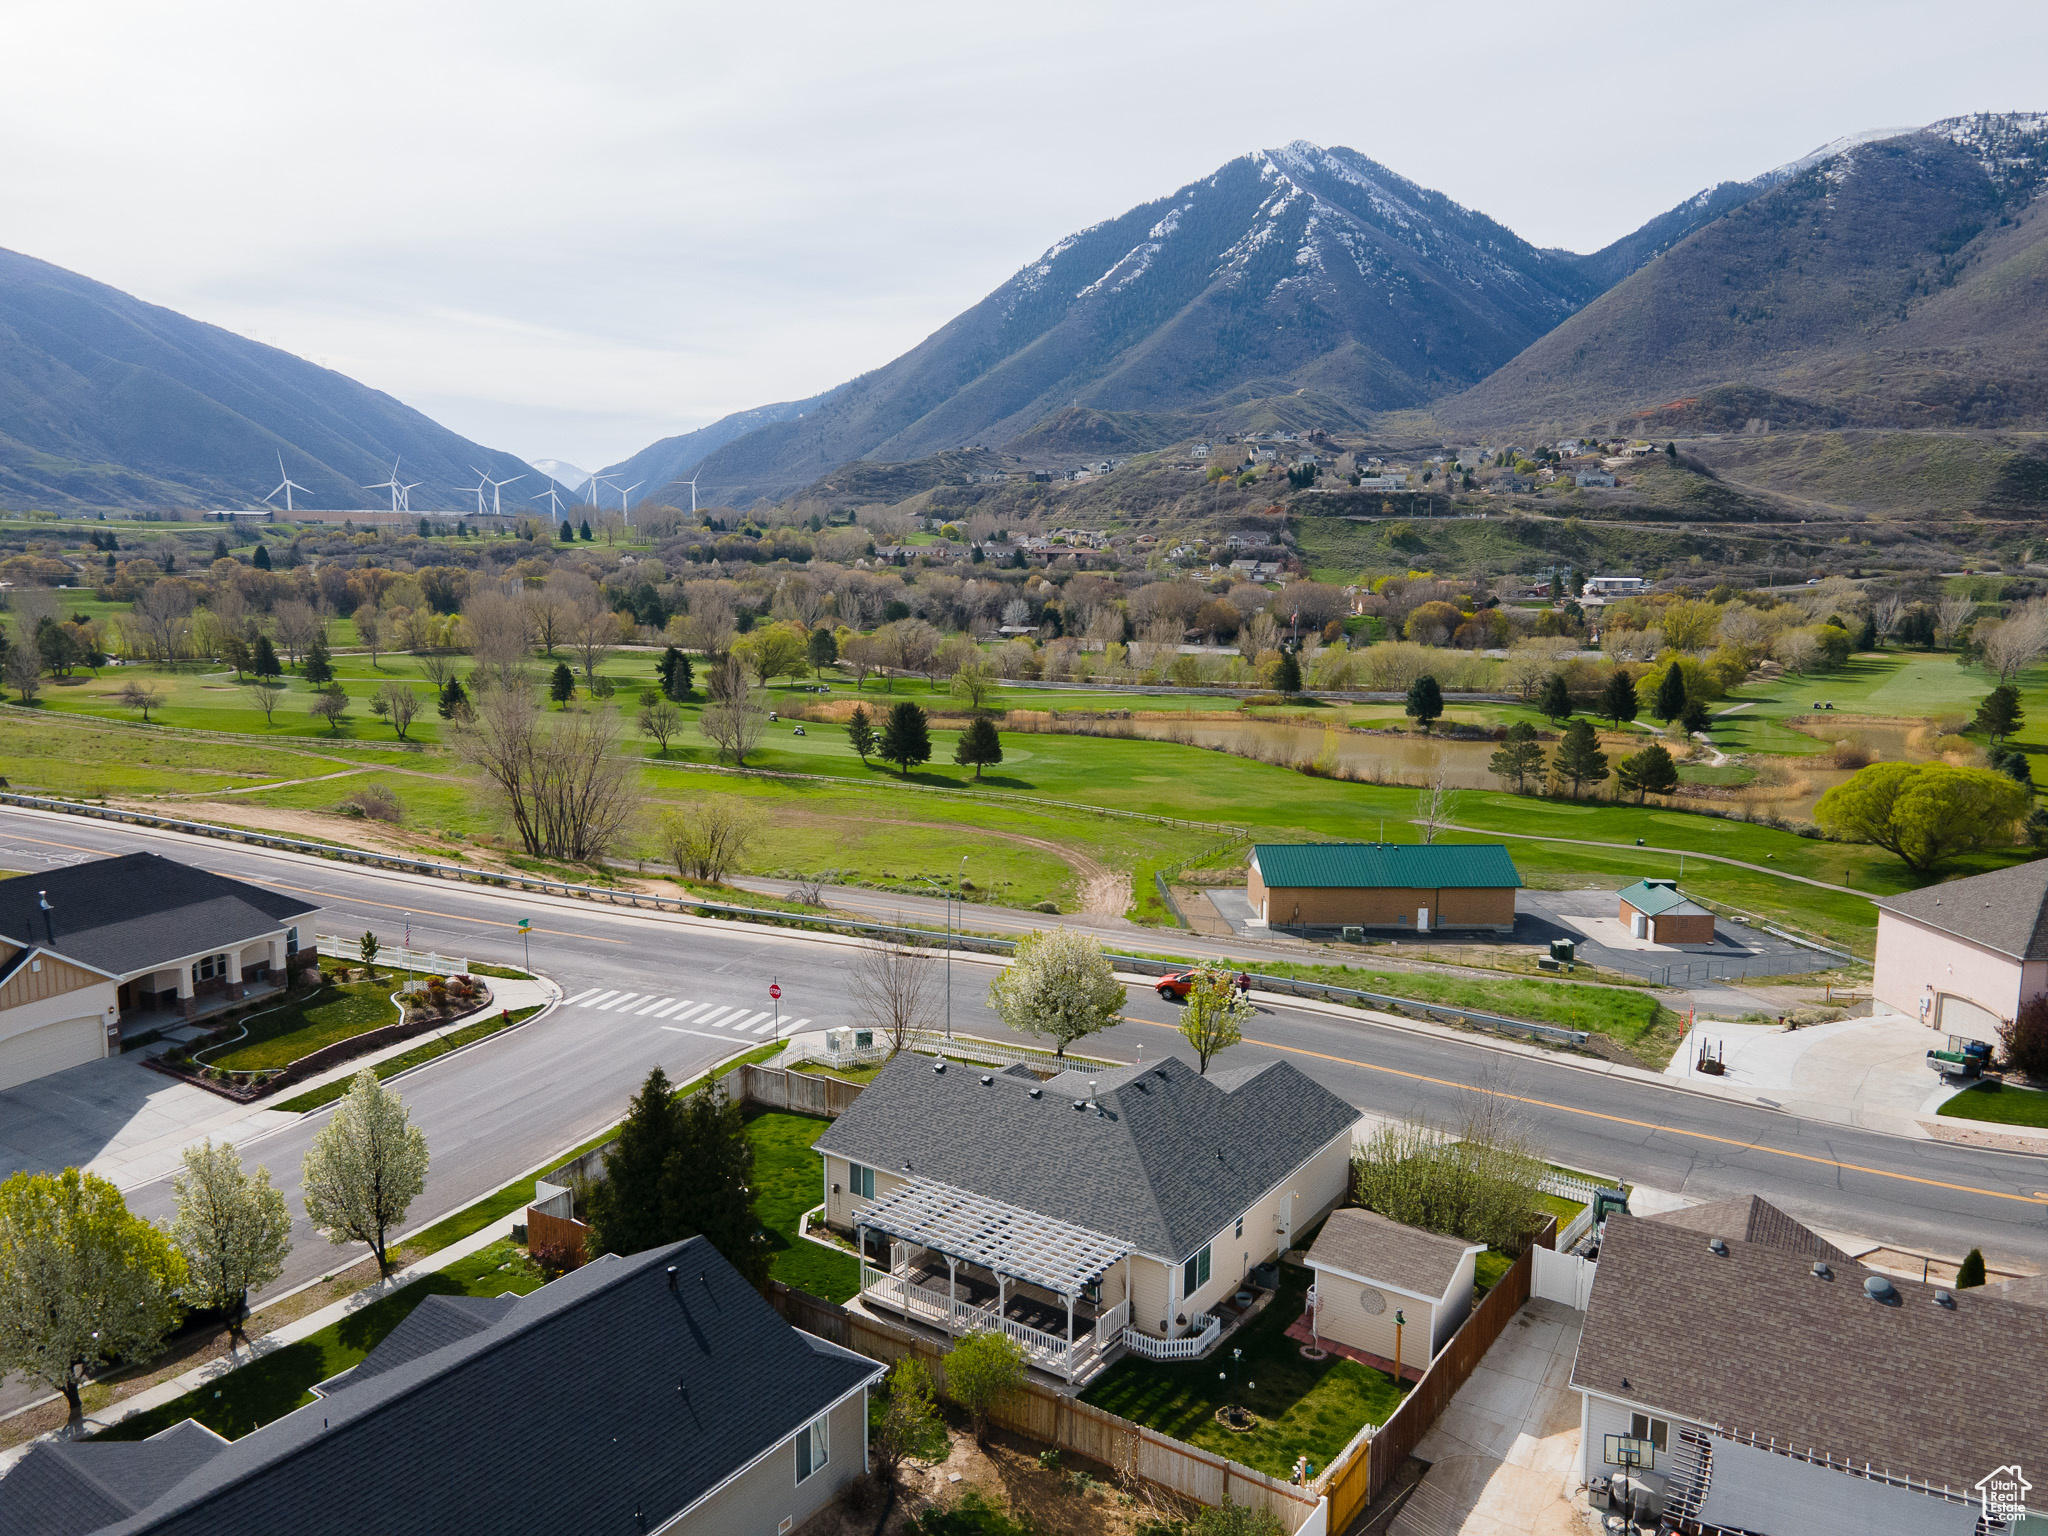 2899 E CANYON CREST, Spanish Fork, Utah 84660, 5 Bedrooms Bedrooms, 13 Rooms Rooms,3 BathroomsBathrooms,Residential,For sale,CANYON CREST,1993726